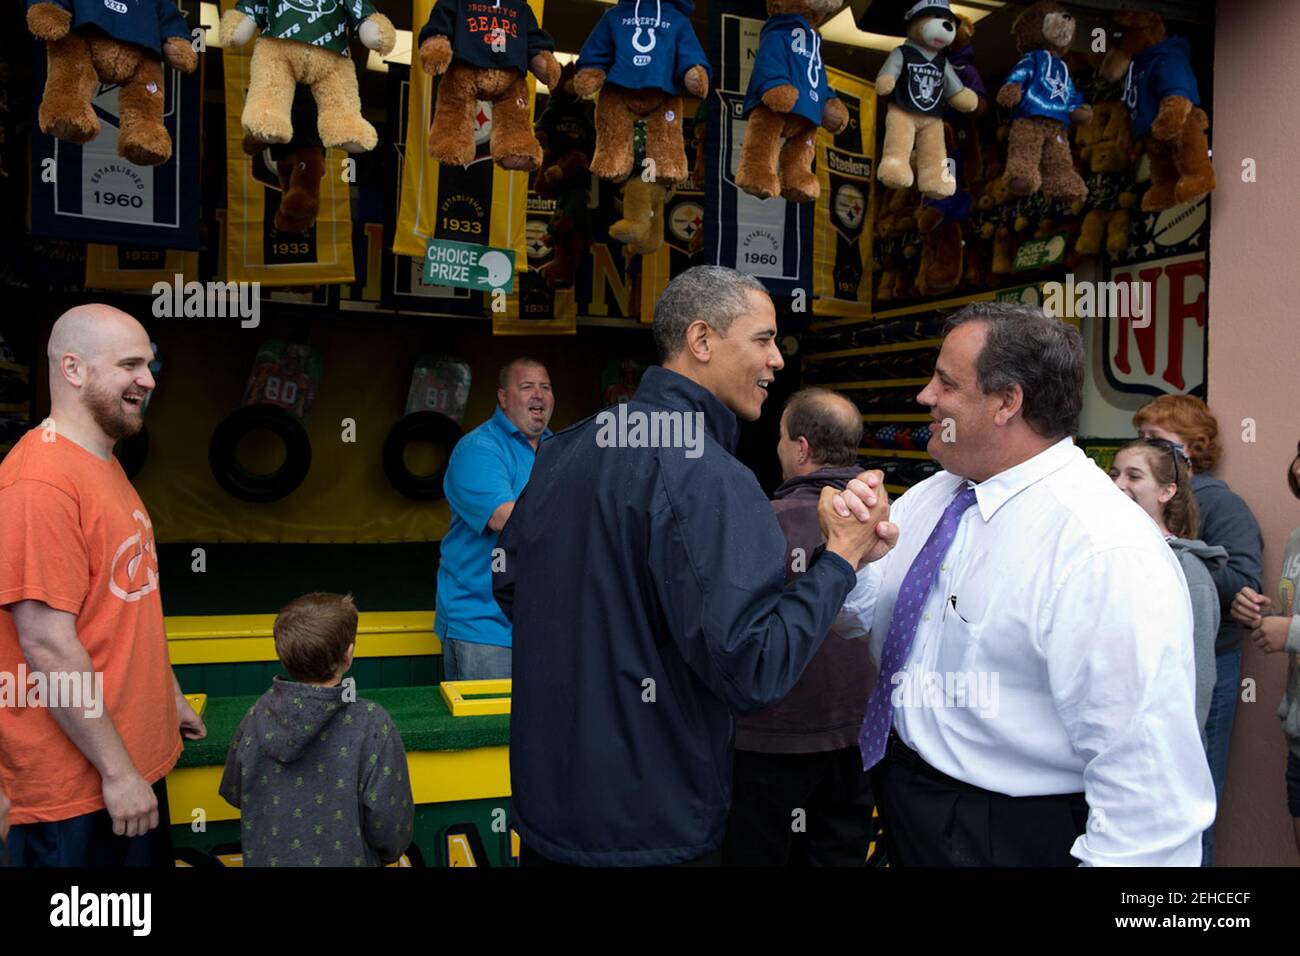 May 28, 2013 'The President congratulates New Jersey Gov. Chris Christie while playing the 'TouchDown Fever' arcade game along the Point Pleasant boardwalk in Point Pleasant Beach, N.J. The President toured the boardwalk which had reopened following the devastation of Hurricane Sandy in 2012.' Stock Photo